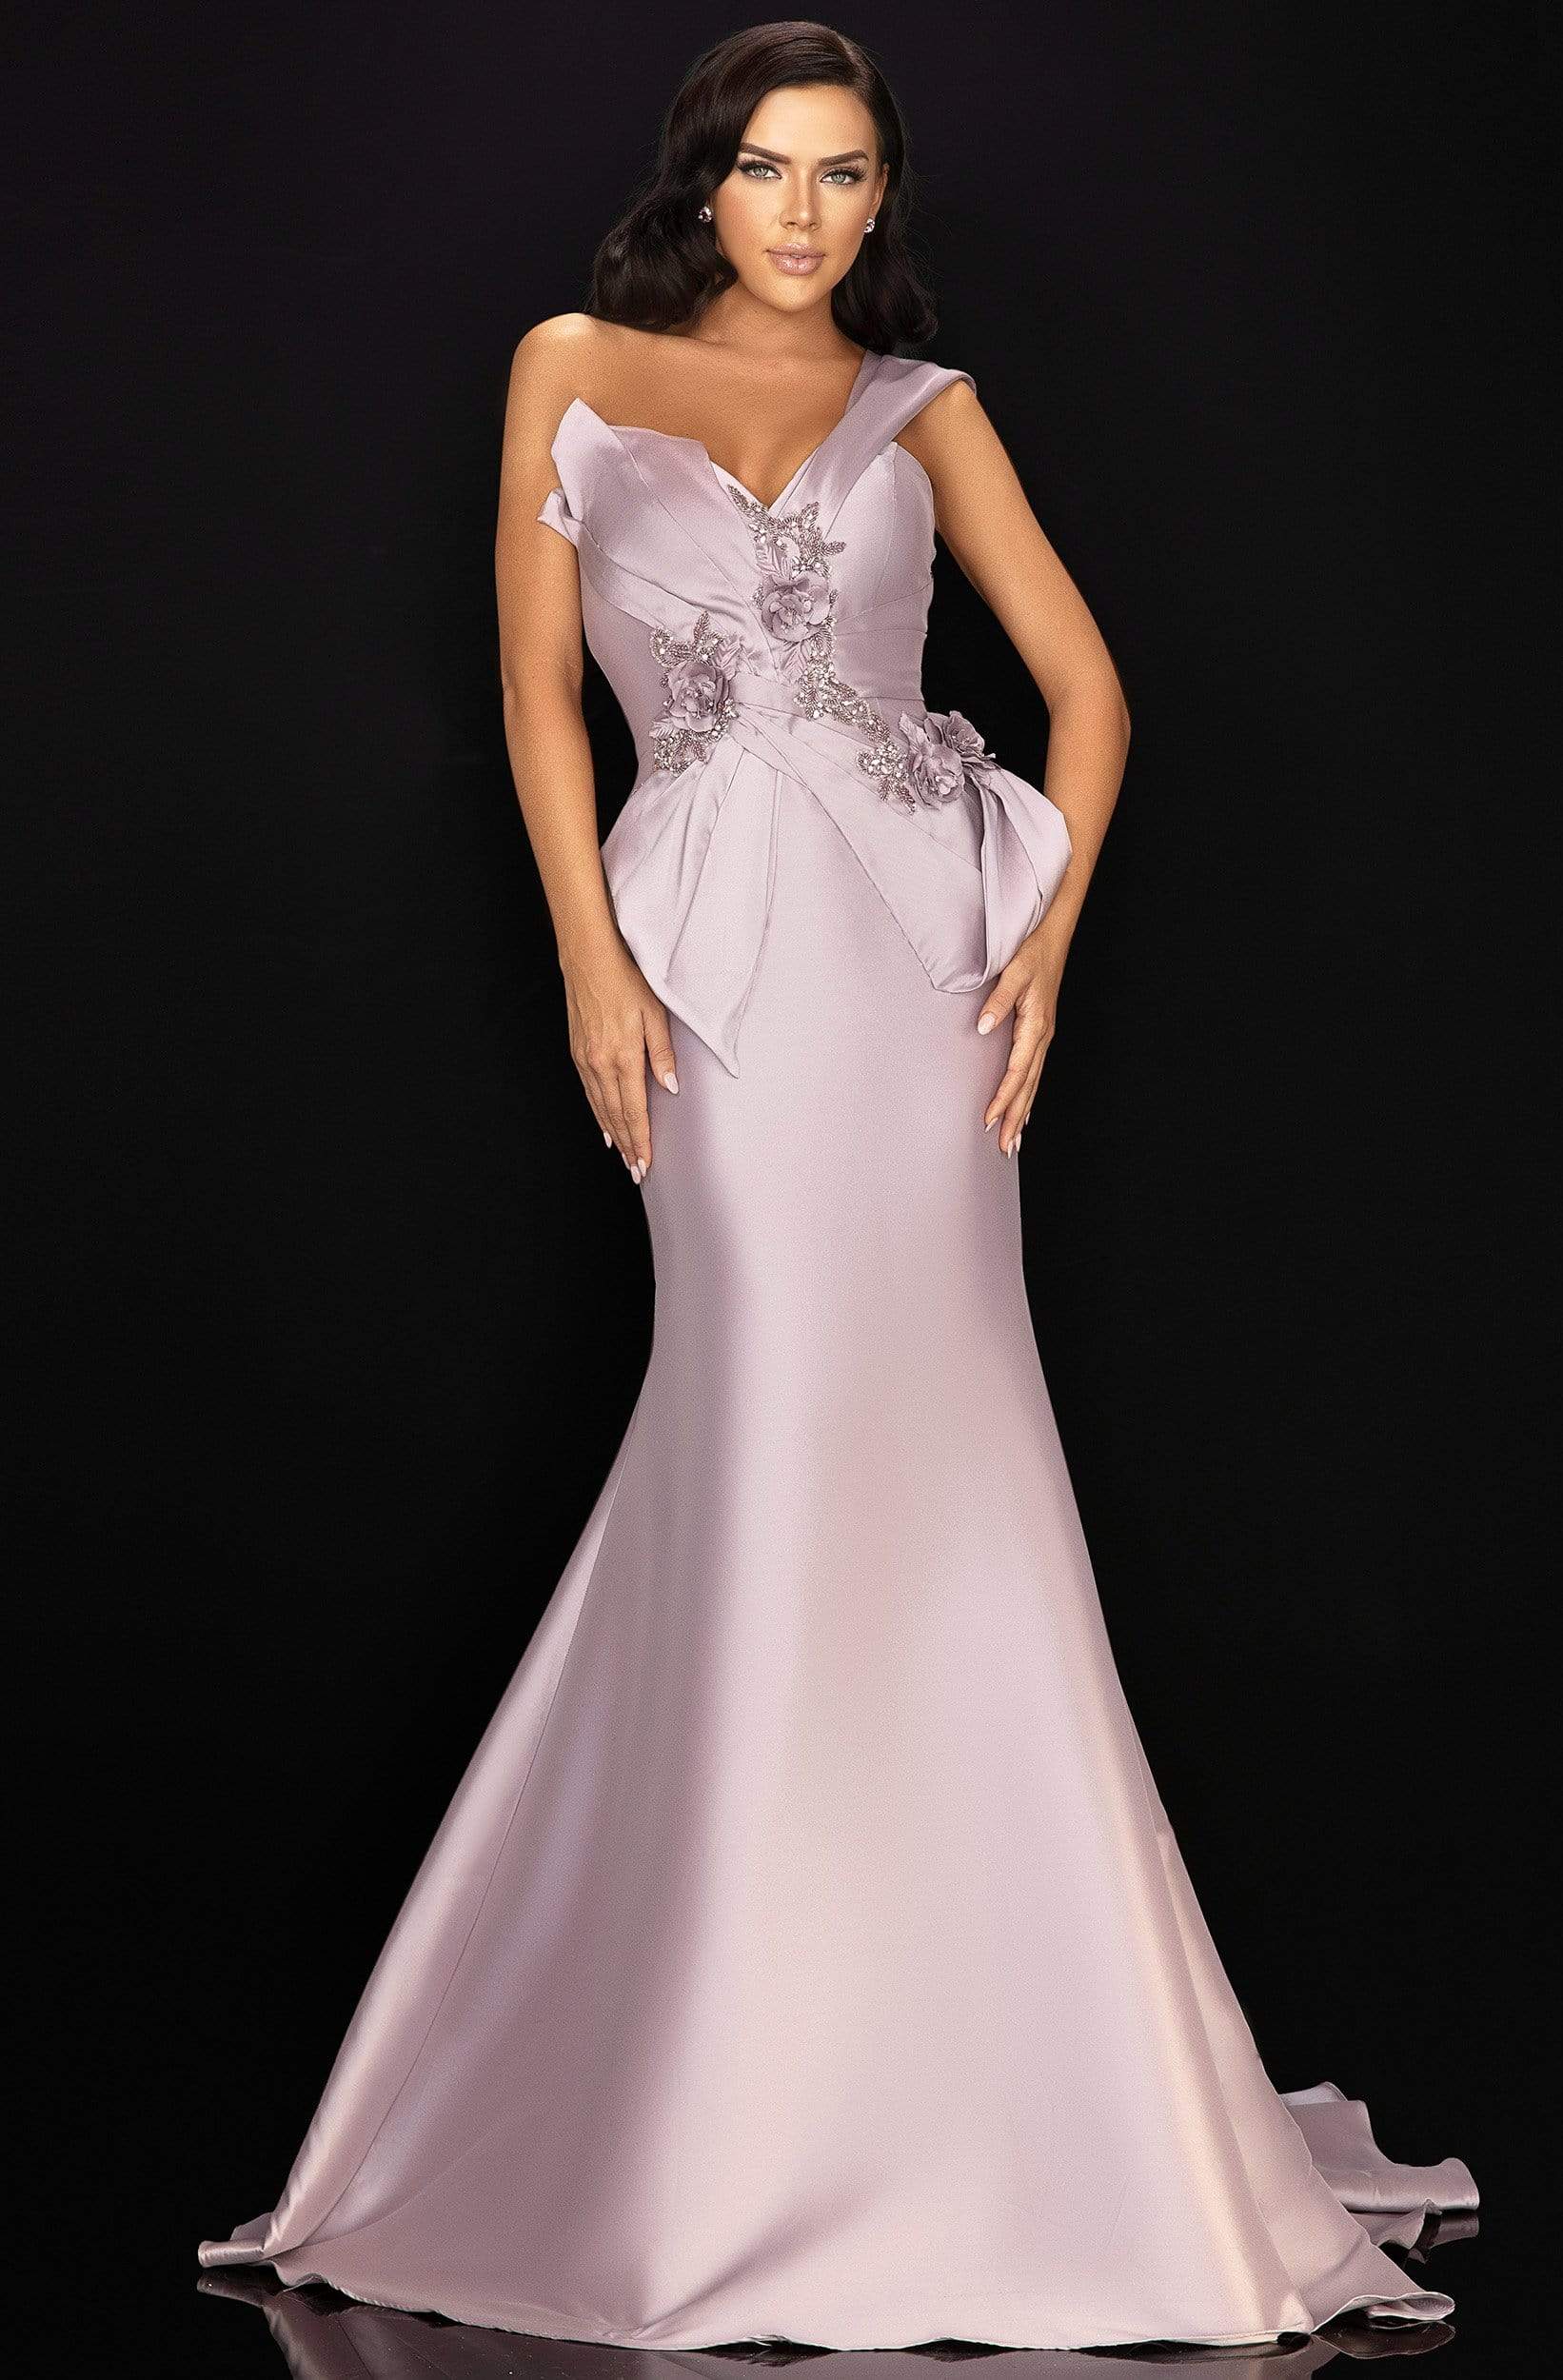 Image of Terani Couture - 2011M2160 Beaded Floral Bodice Knot-Ornate Gown